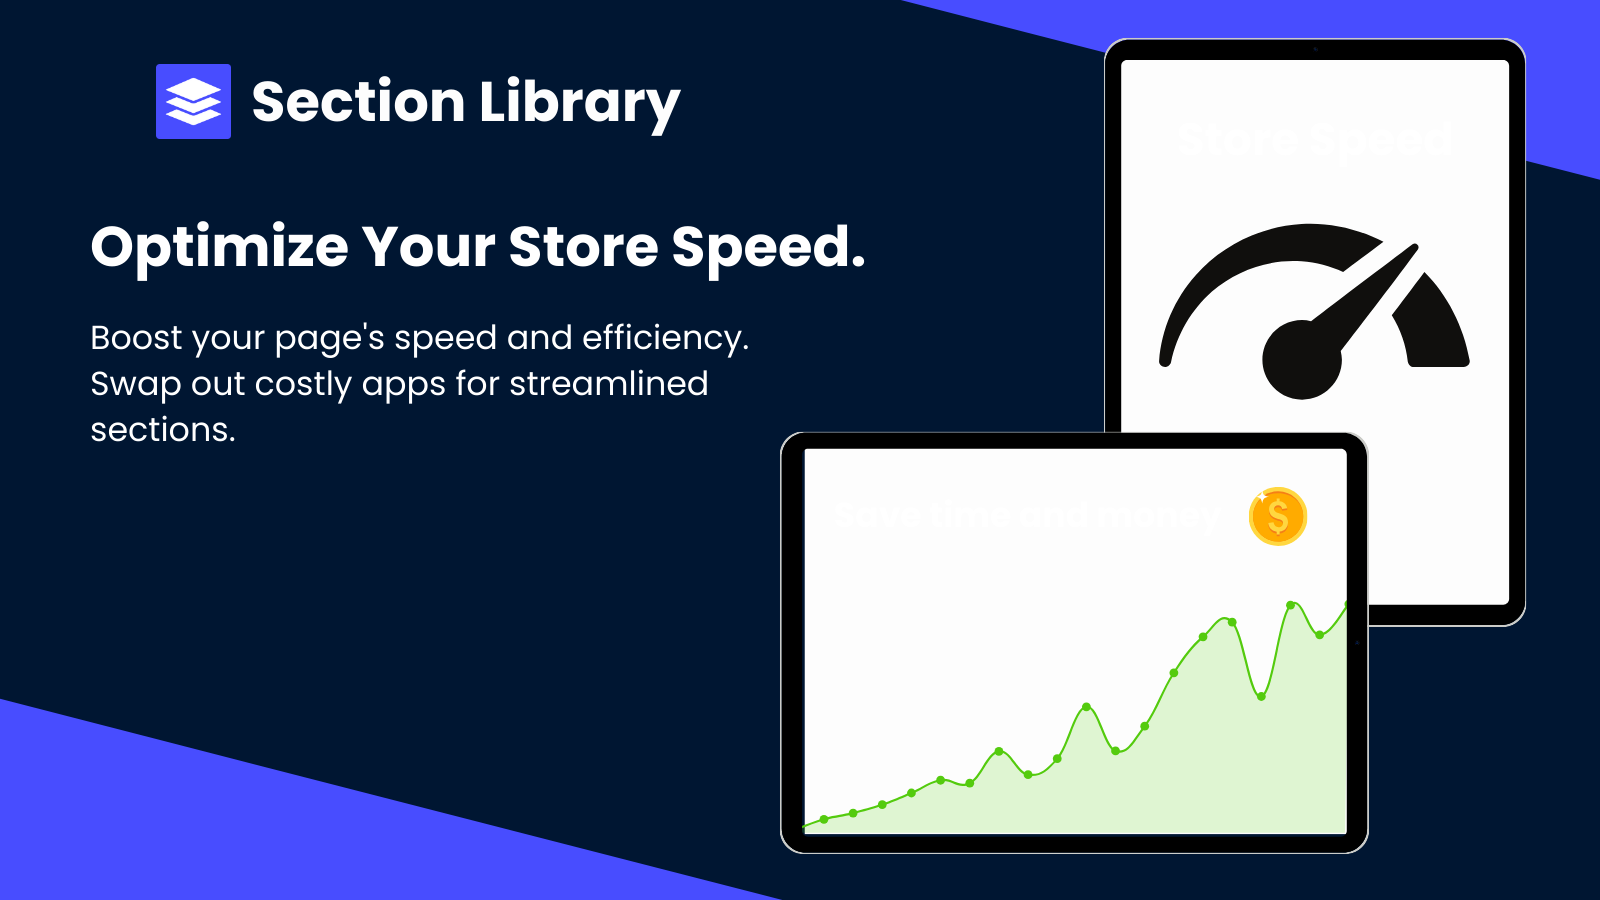 An explanation on how the app can benefit store speed